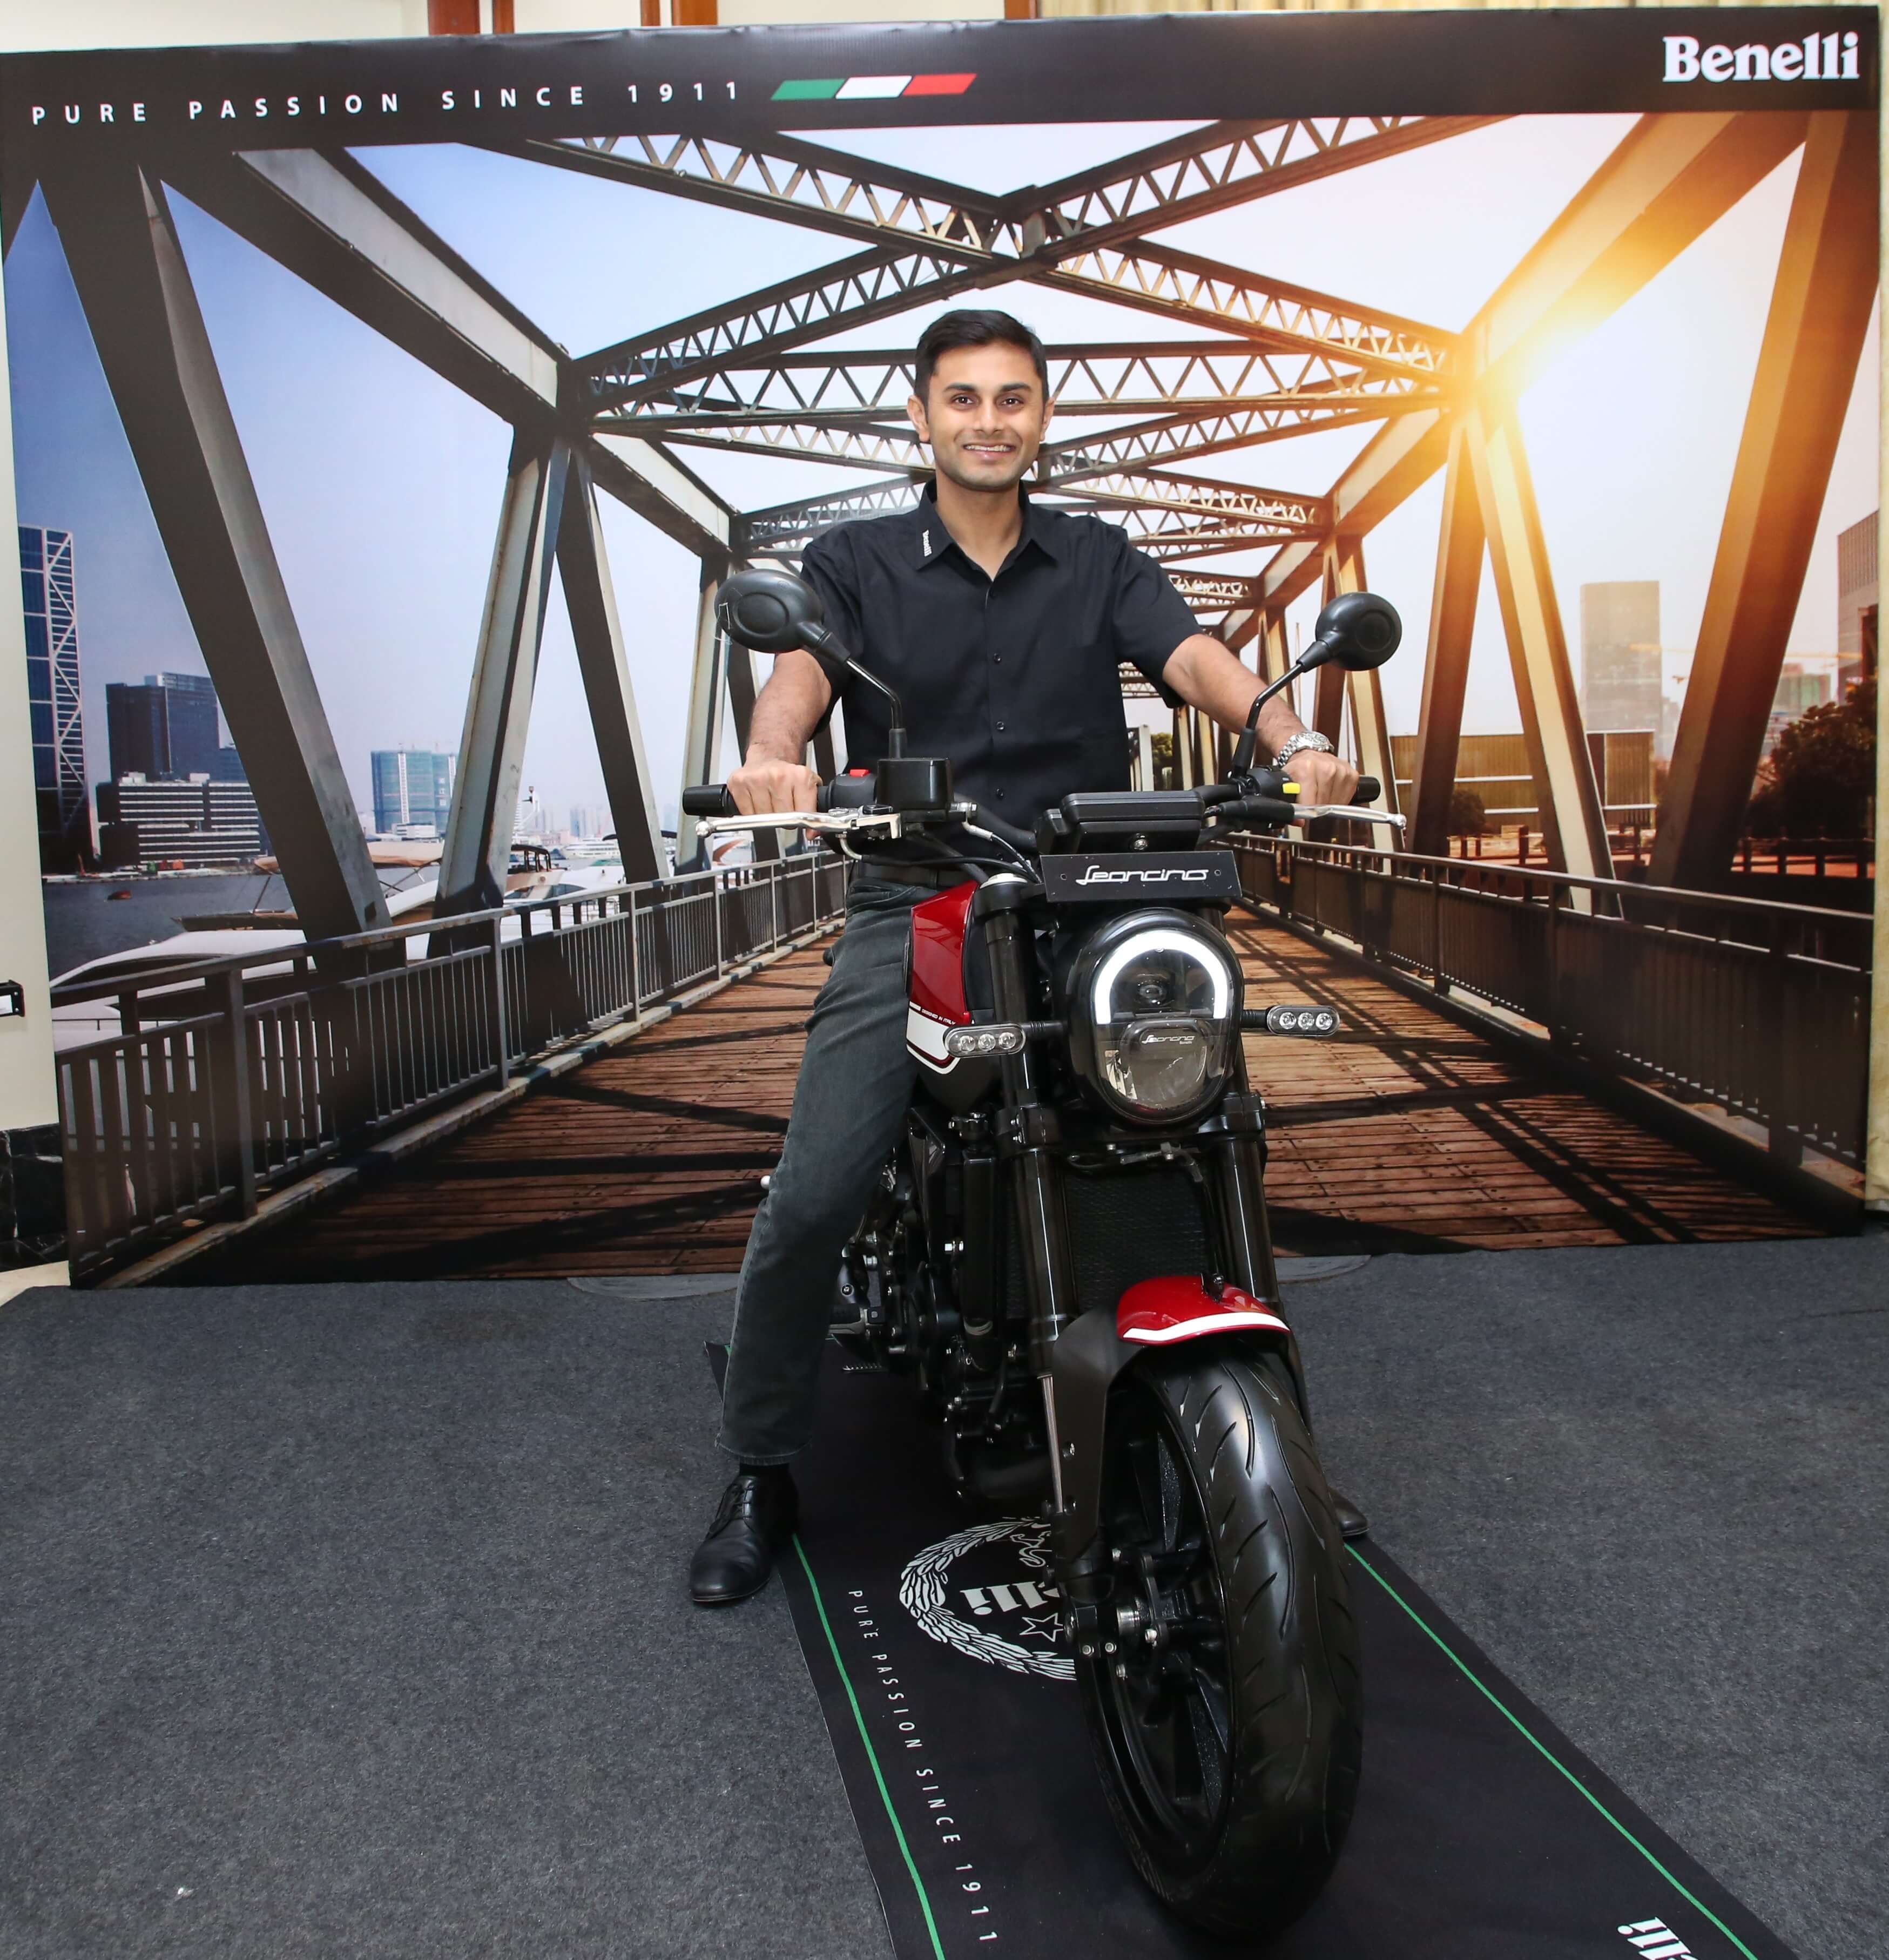 Benelli 502C power cruiser, whose pre-bookings commenced recently, is expected to be rolled out this month.